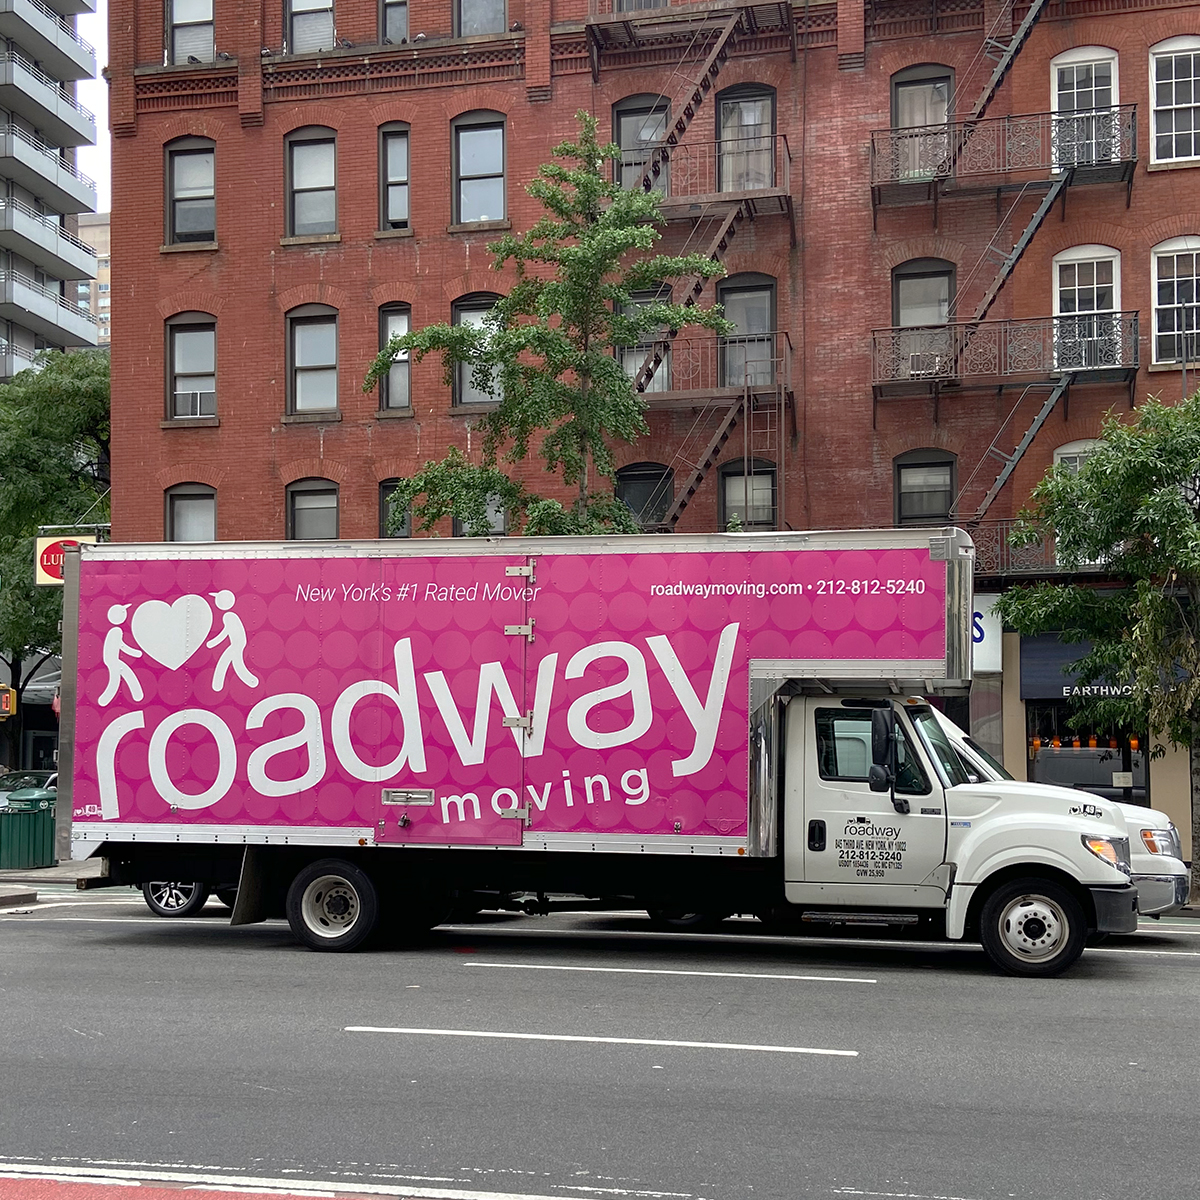 moving companies hiring in nyc